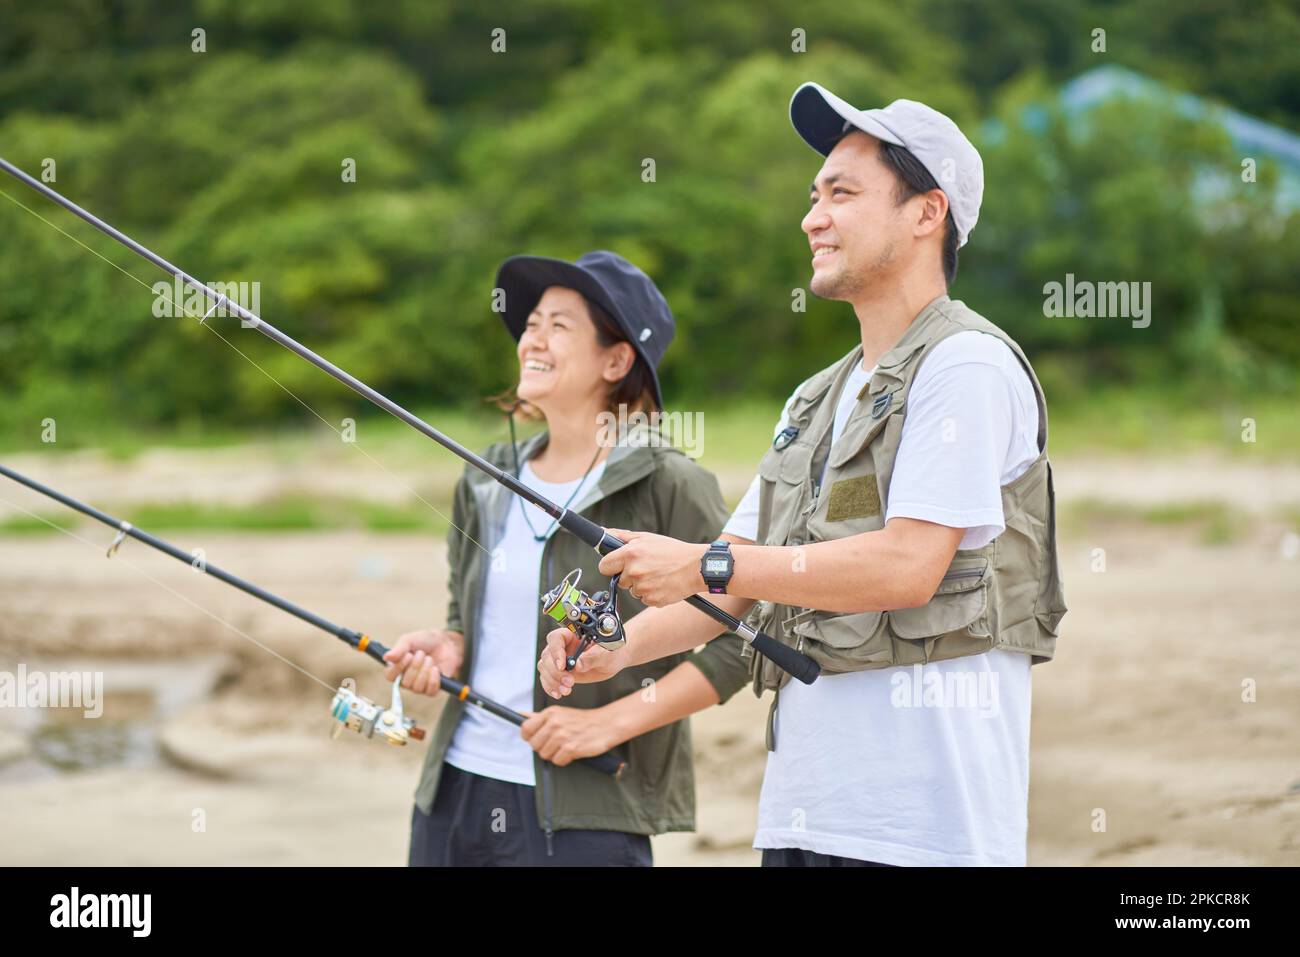 Man and woman fishing on the beach Stock Photo